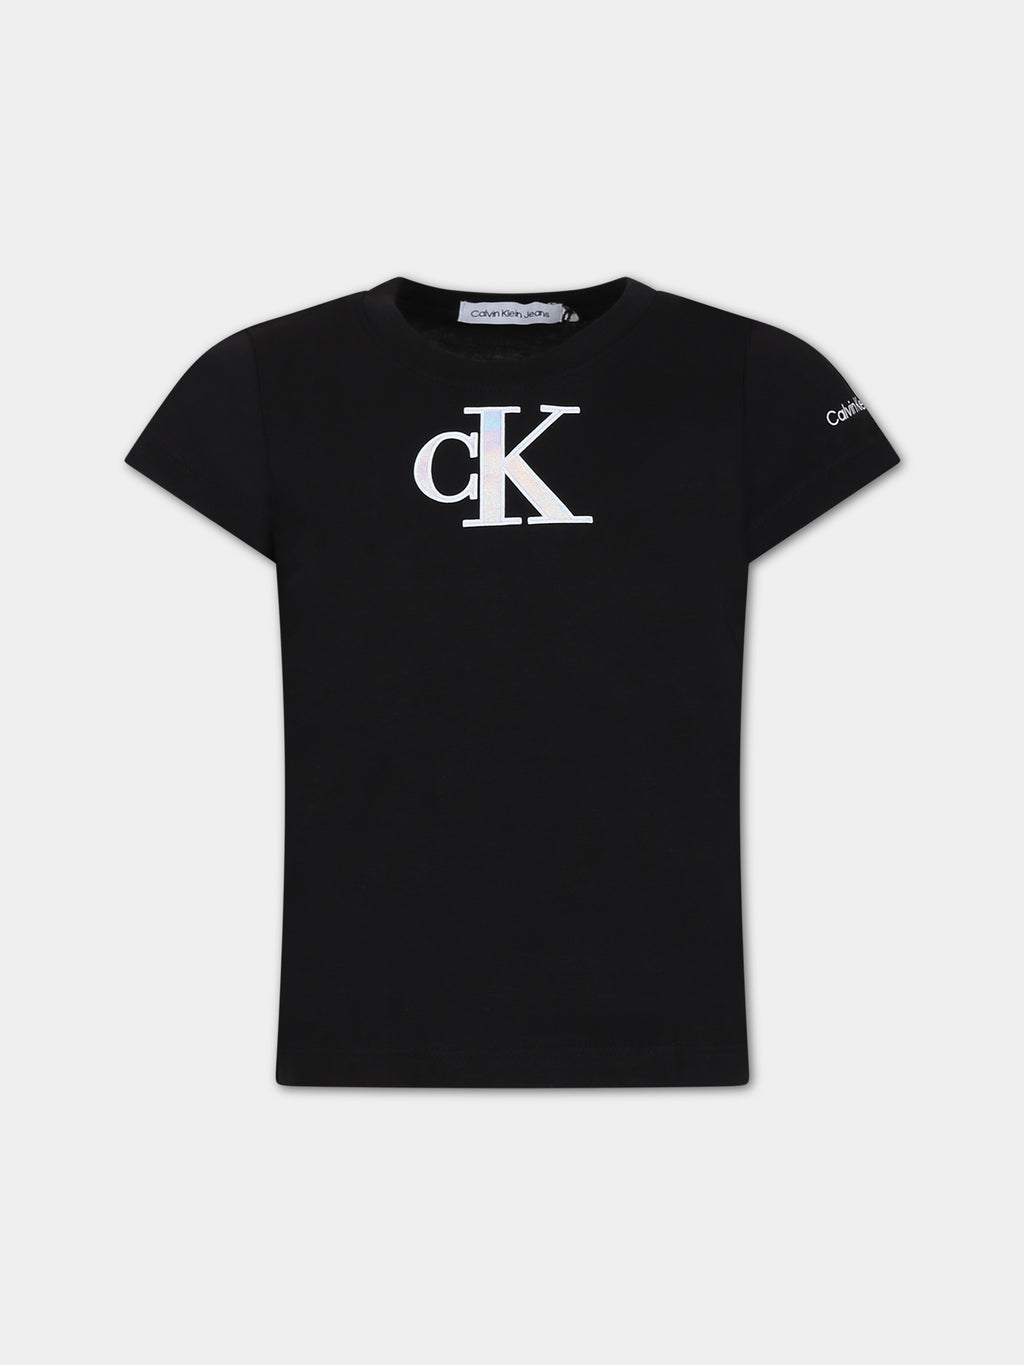 Black t-shirt for gilr with logo